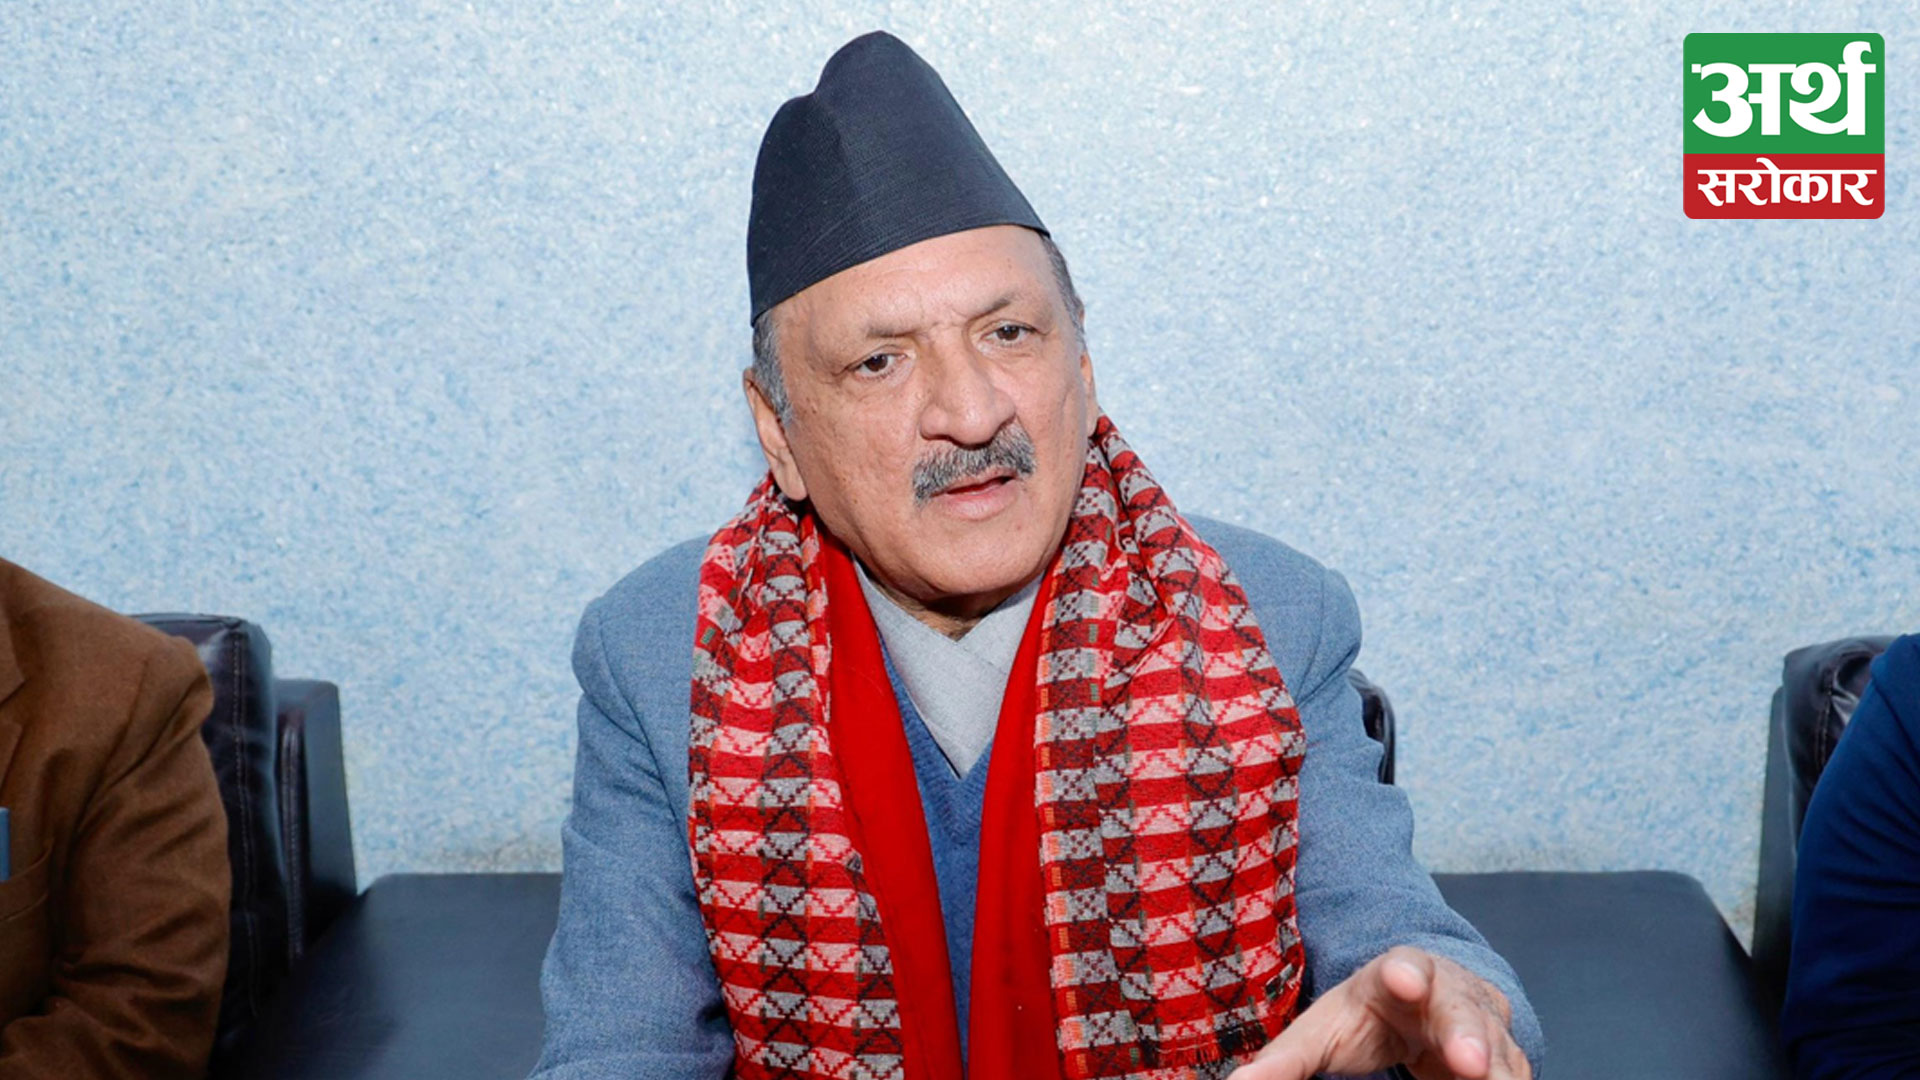 Country’s economy is improving, claims Finance Minister Mahat